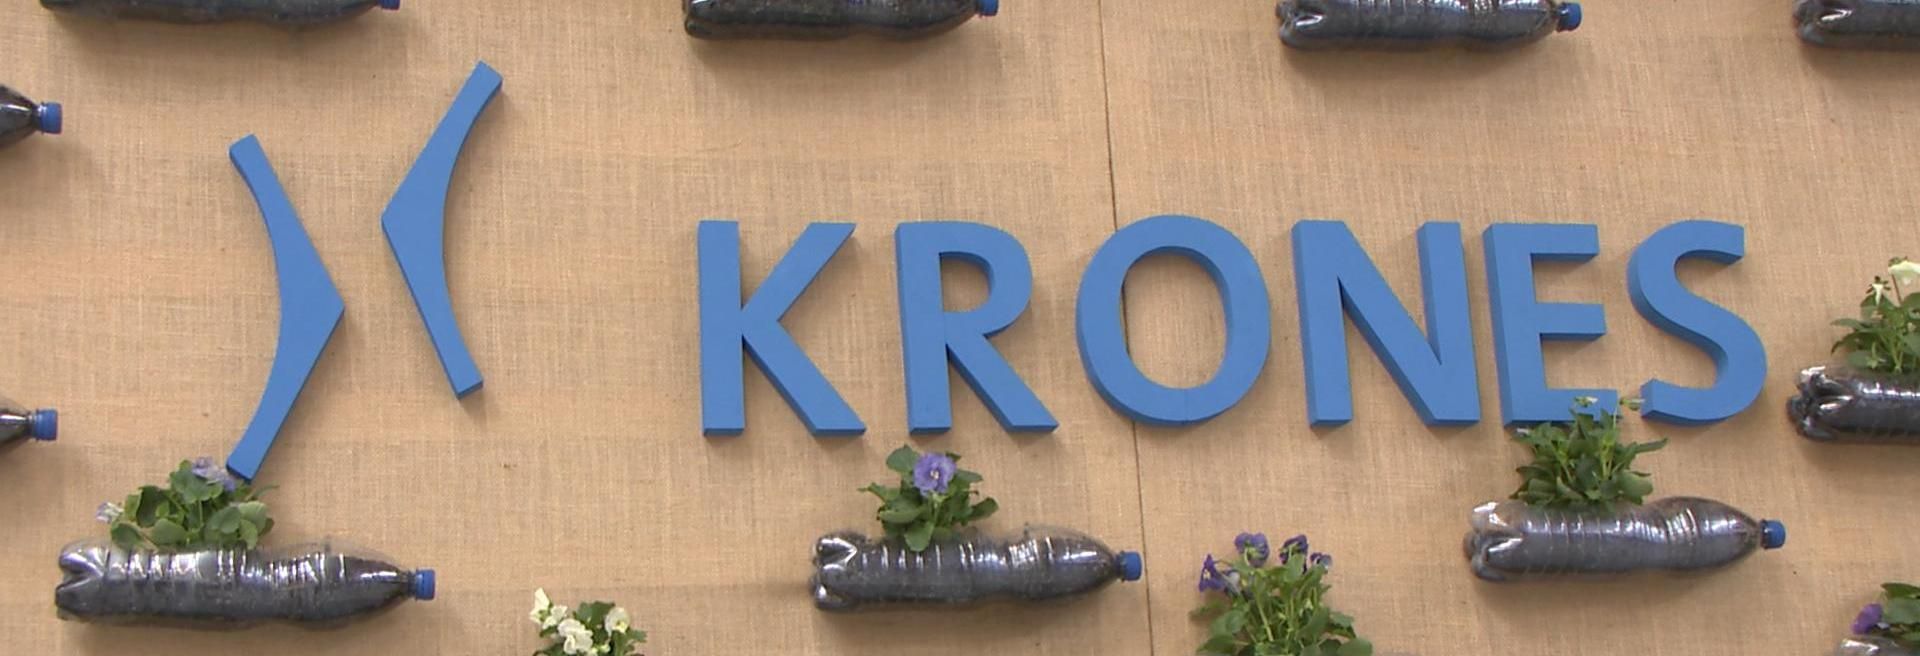 Krones' first European plant outside Germany is now complete in Debrecen - VIDEO REPORT